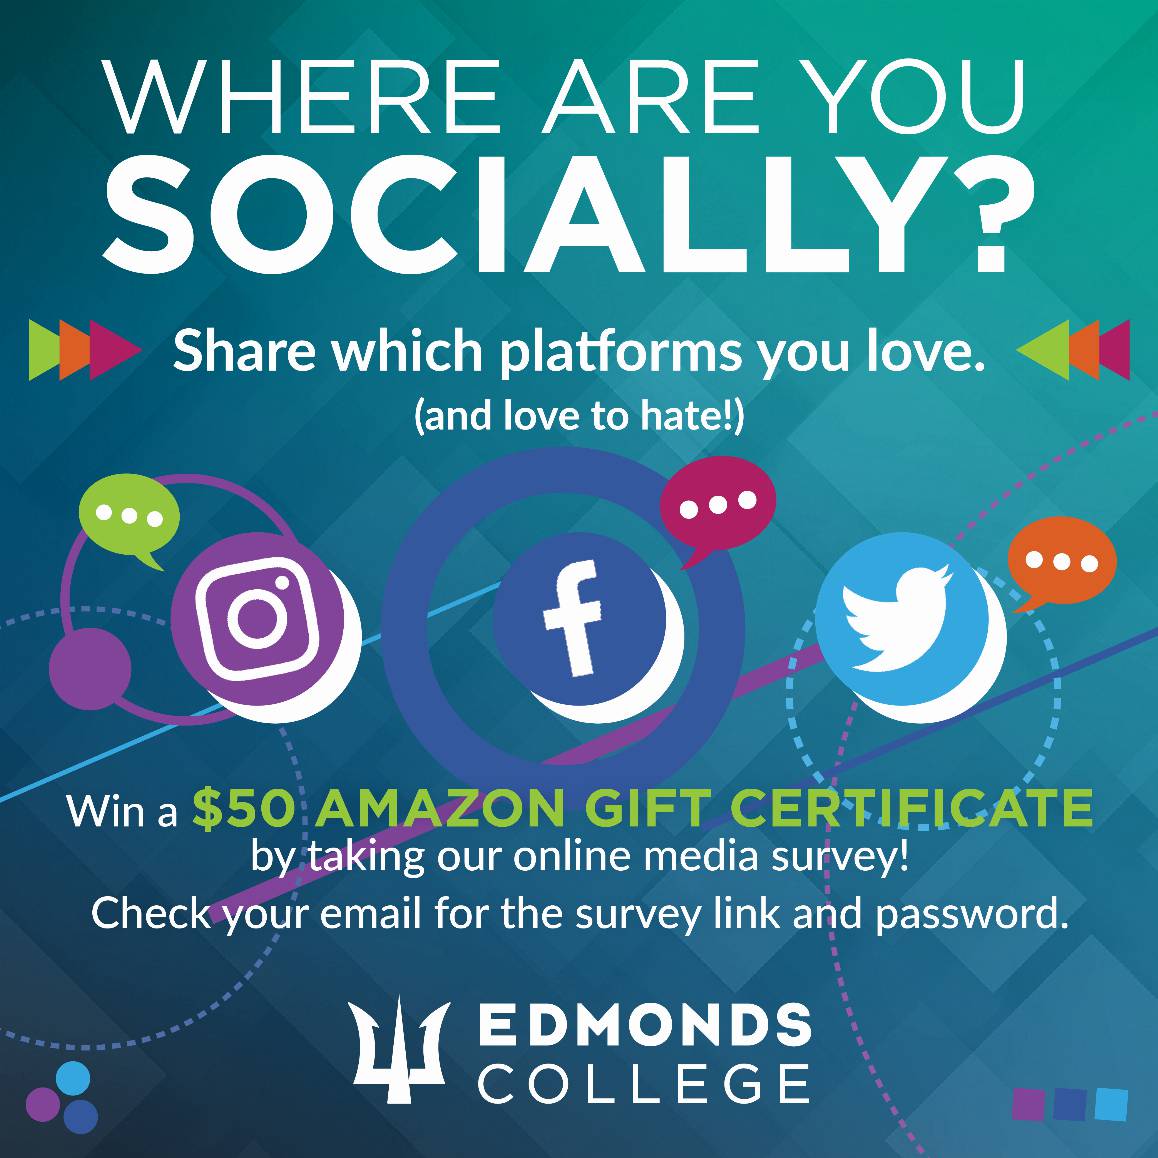 Where are you socially? Share which platforms you love.